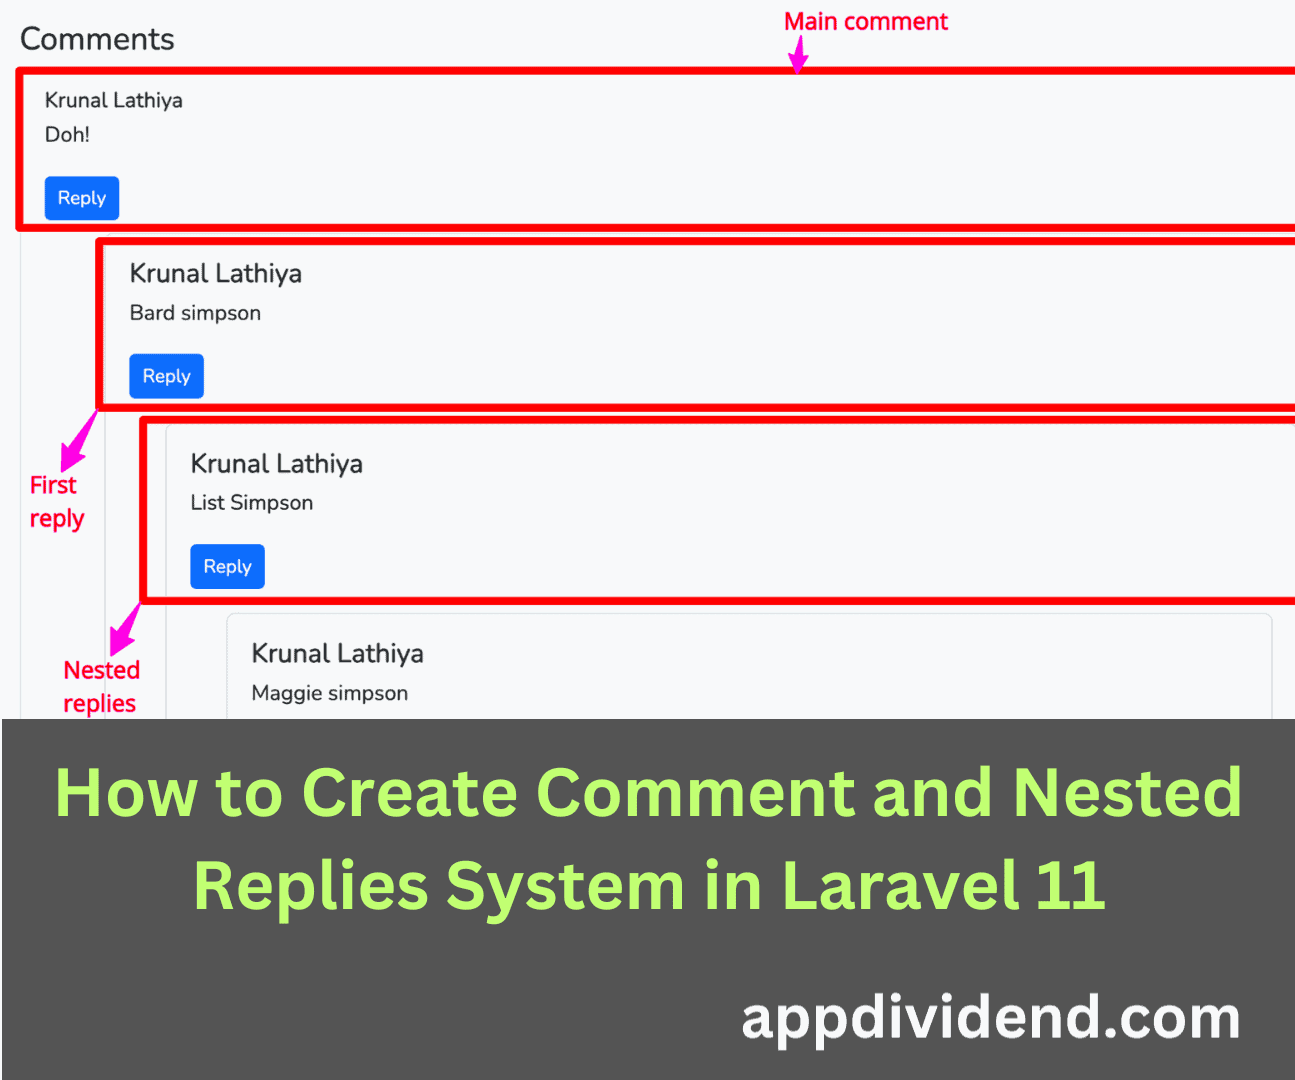 How to Create Comment and Nested Replies System in Laravel 11